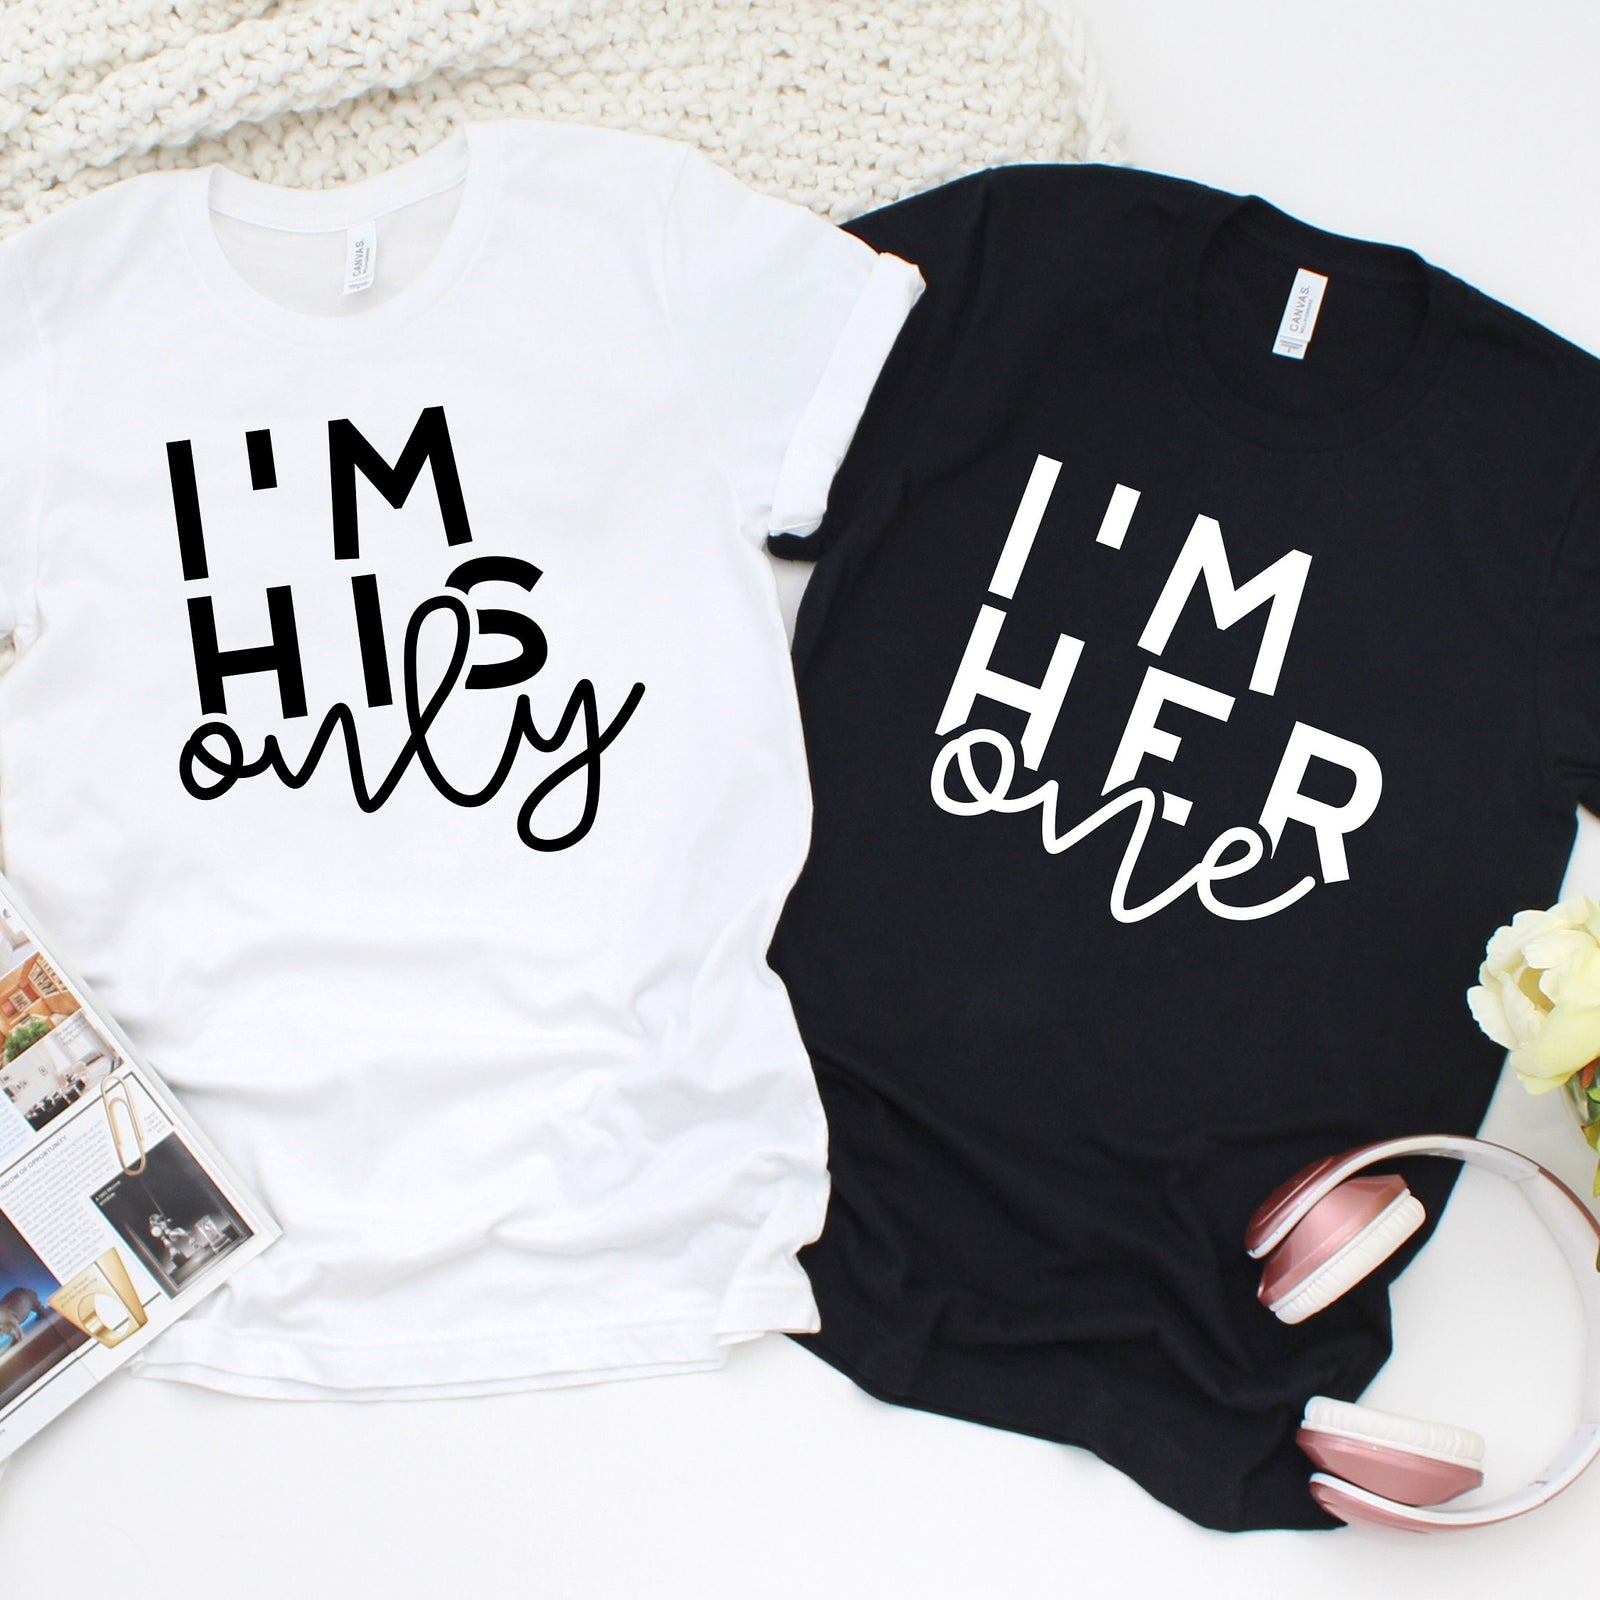 I'm His Only - I'm Her One - Couples T Shirts - Matching Shirts for Couples - Honey Moon - Anniversary Vacation